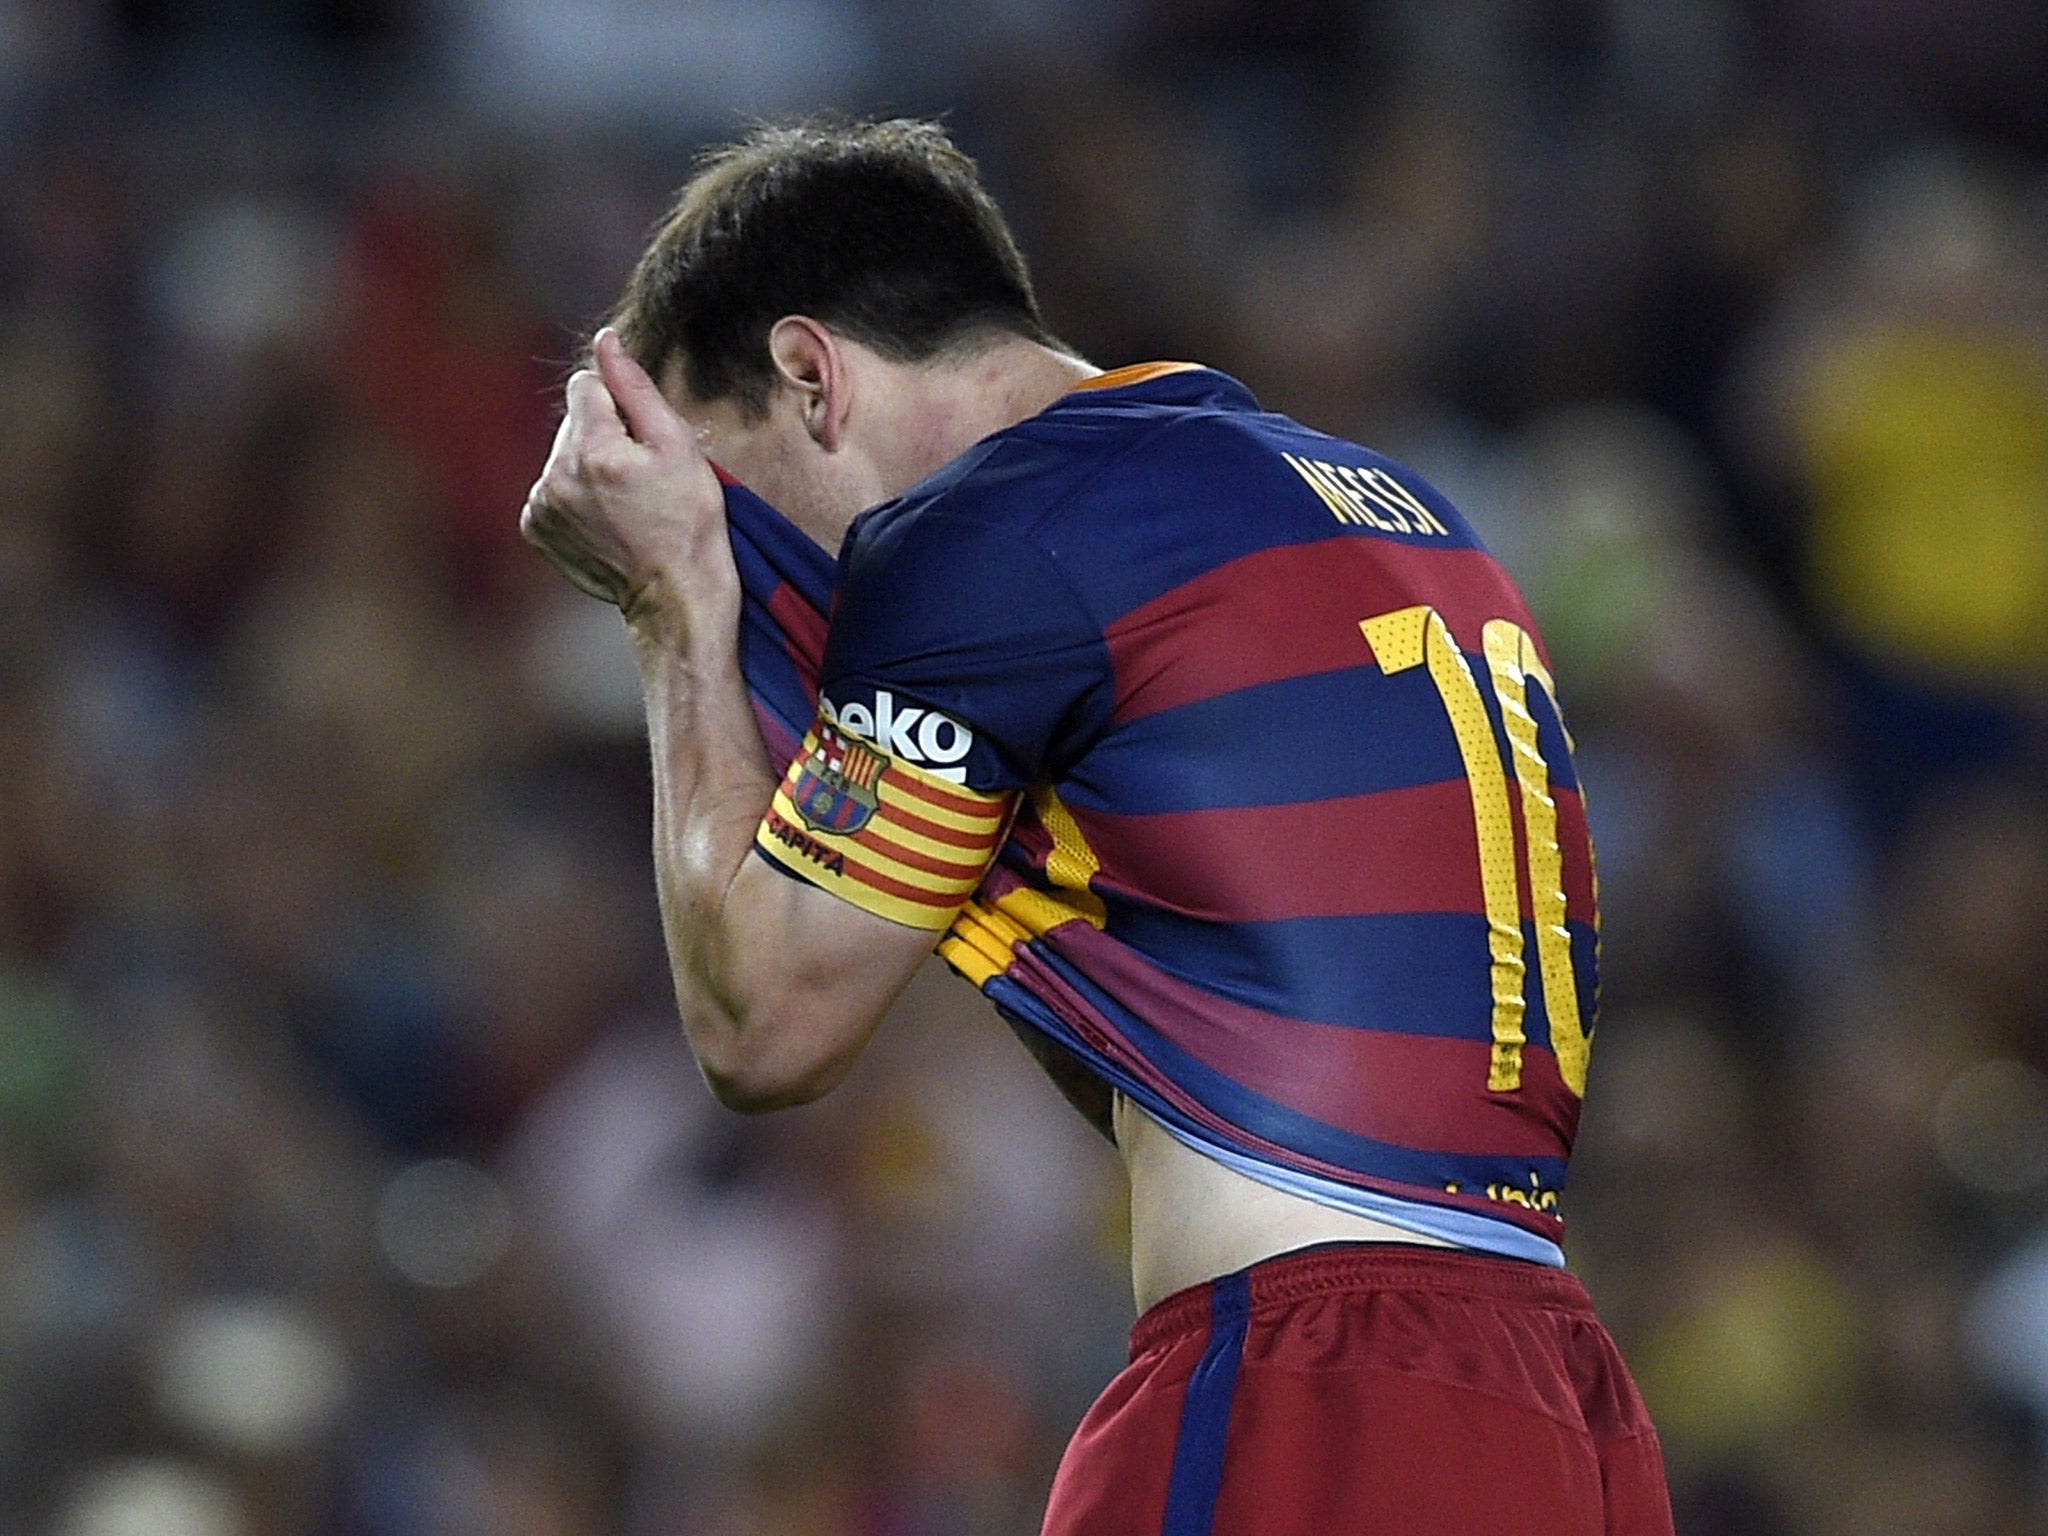 Lionel Messi missed a penalty for the 17th time in his career on Sunday